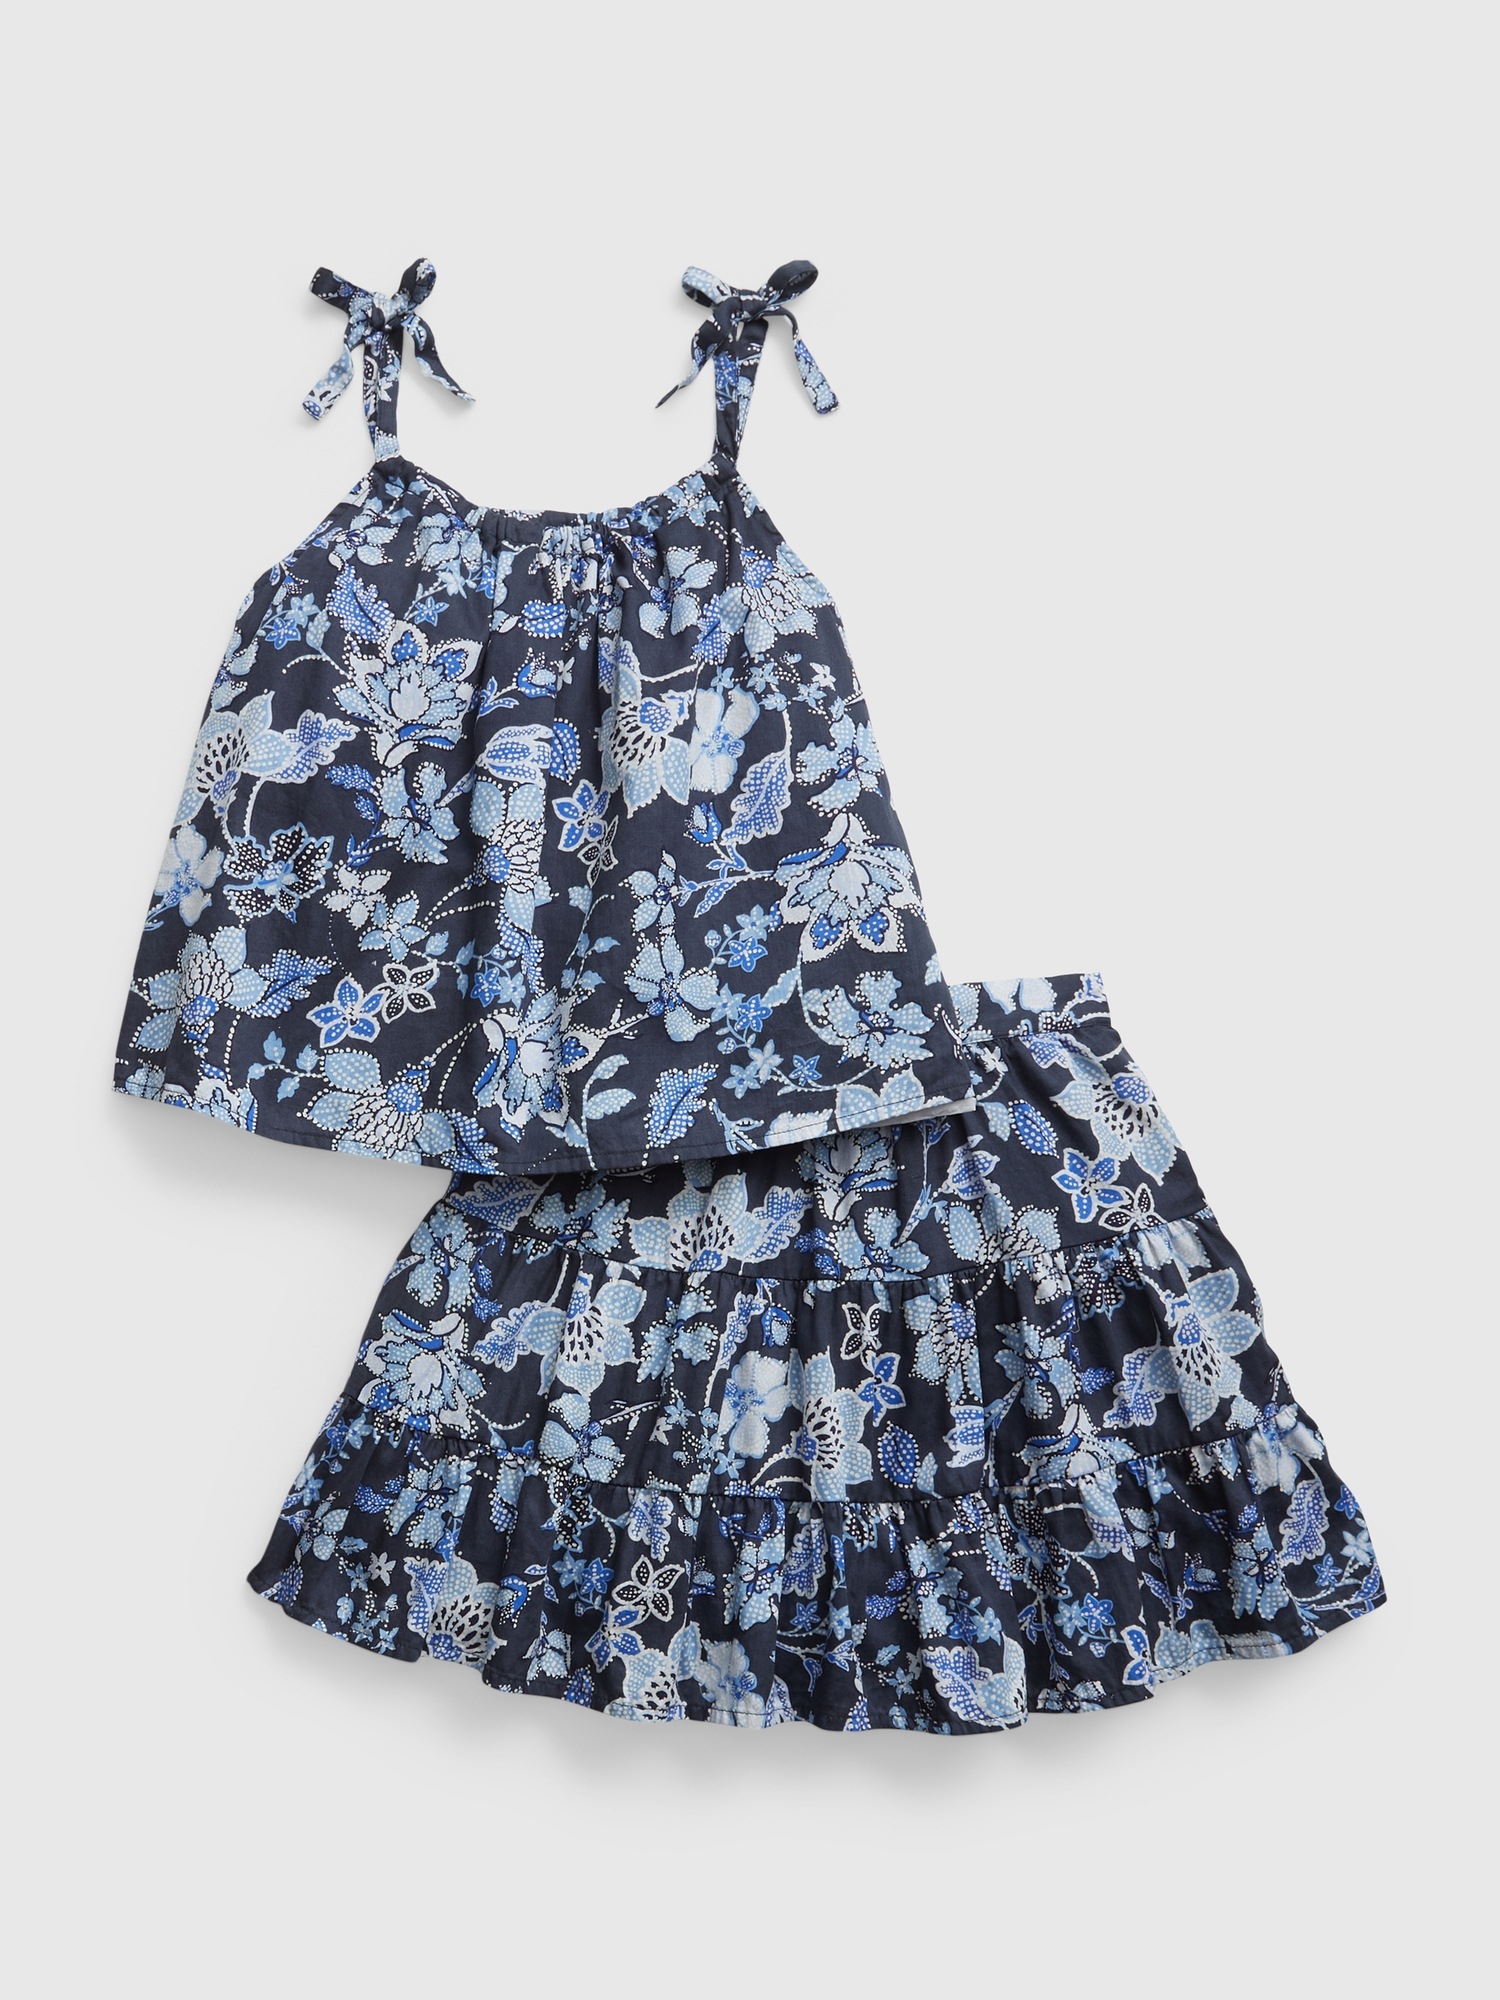 Gap Kids Tank and Tiered Skirt Outfit Set